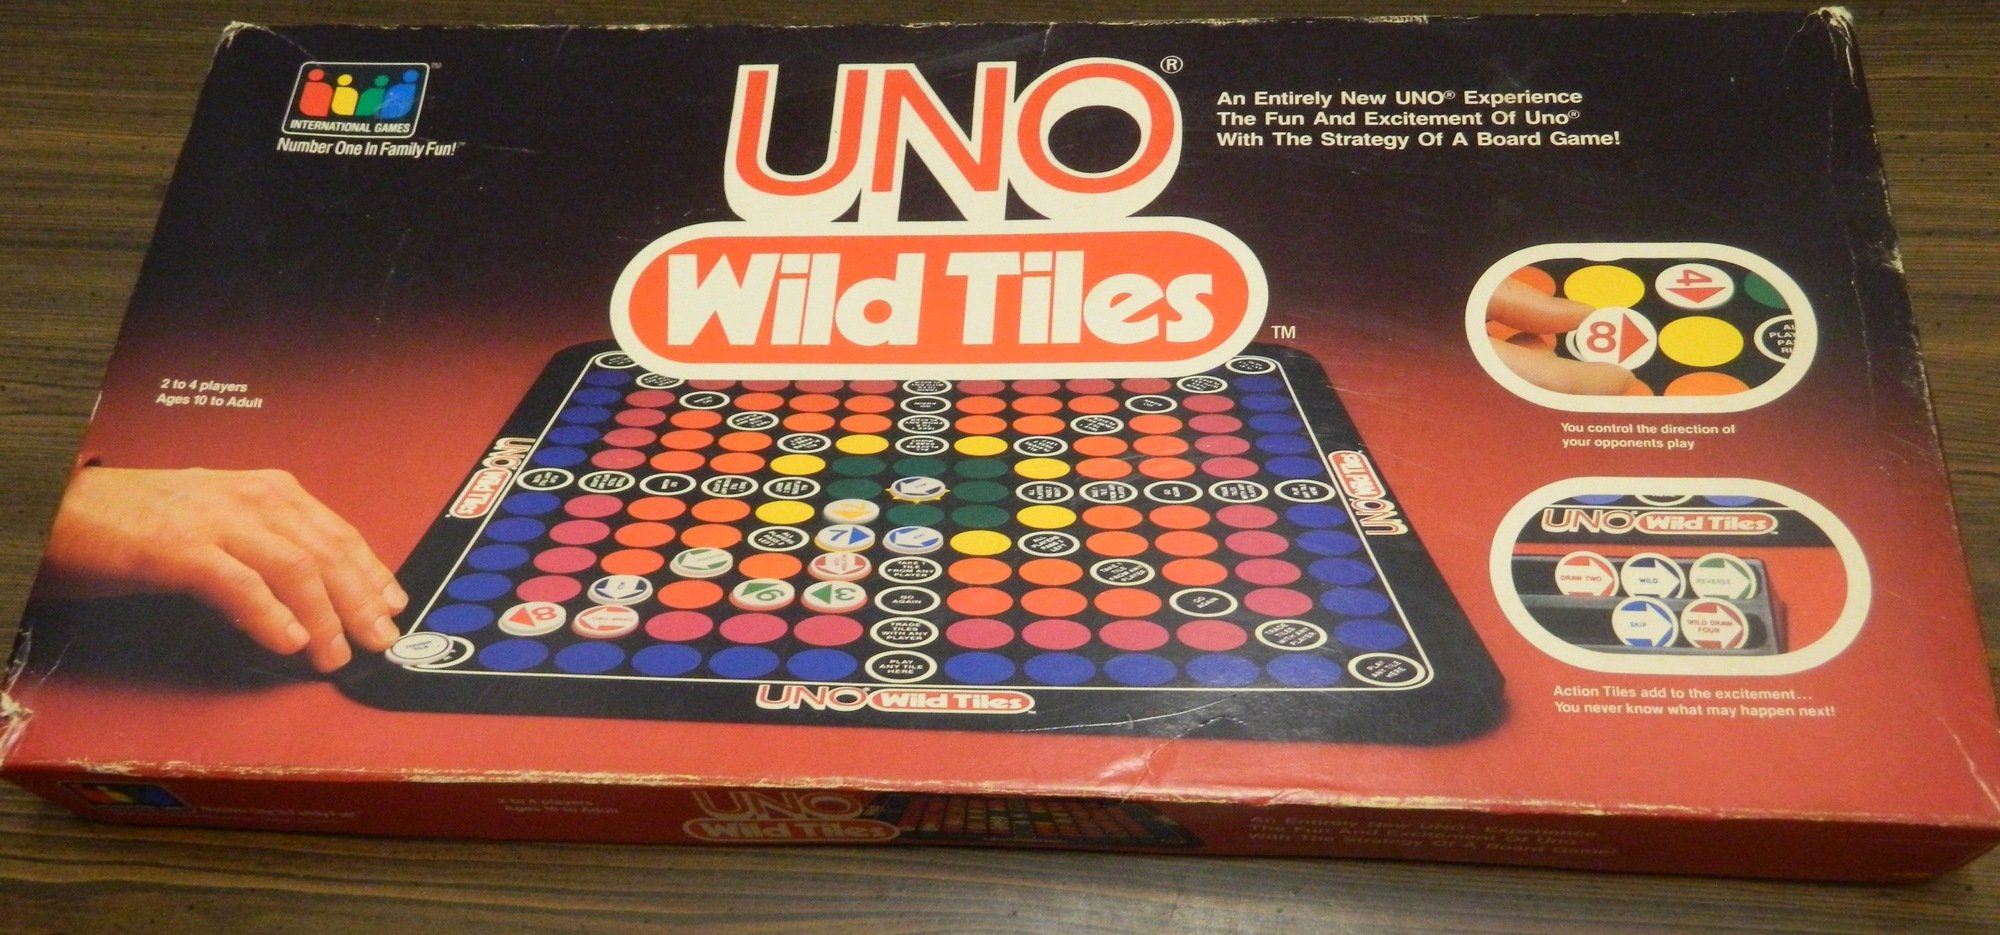 UNO Wild Tiles Board Game Review and Rules